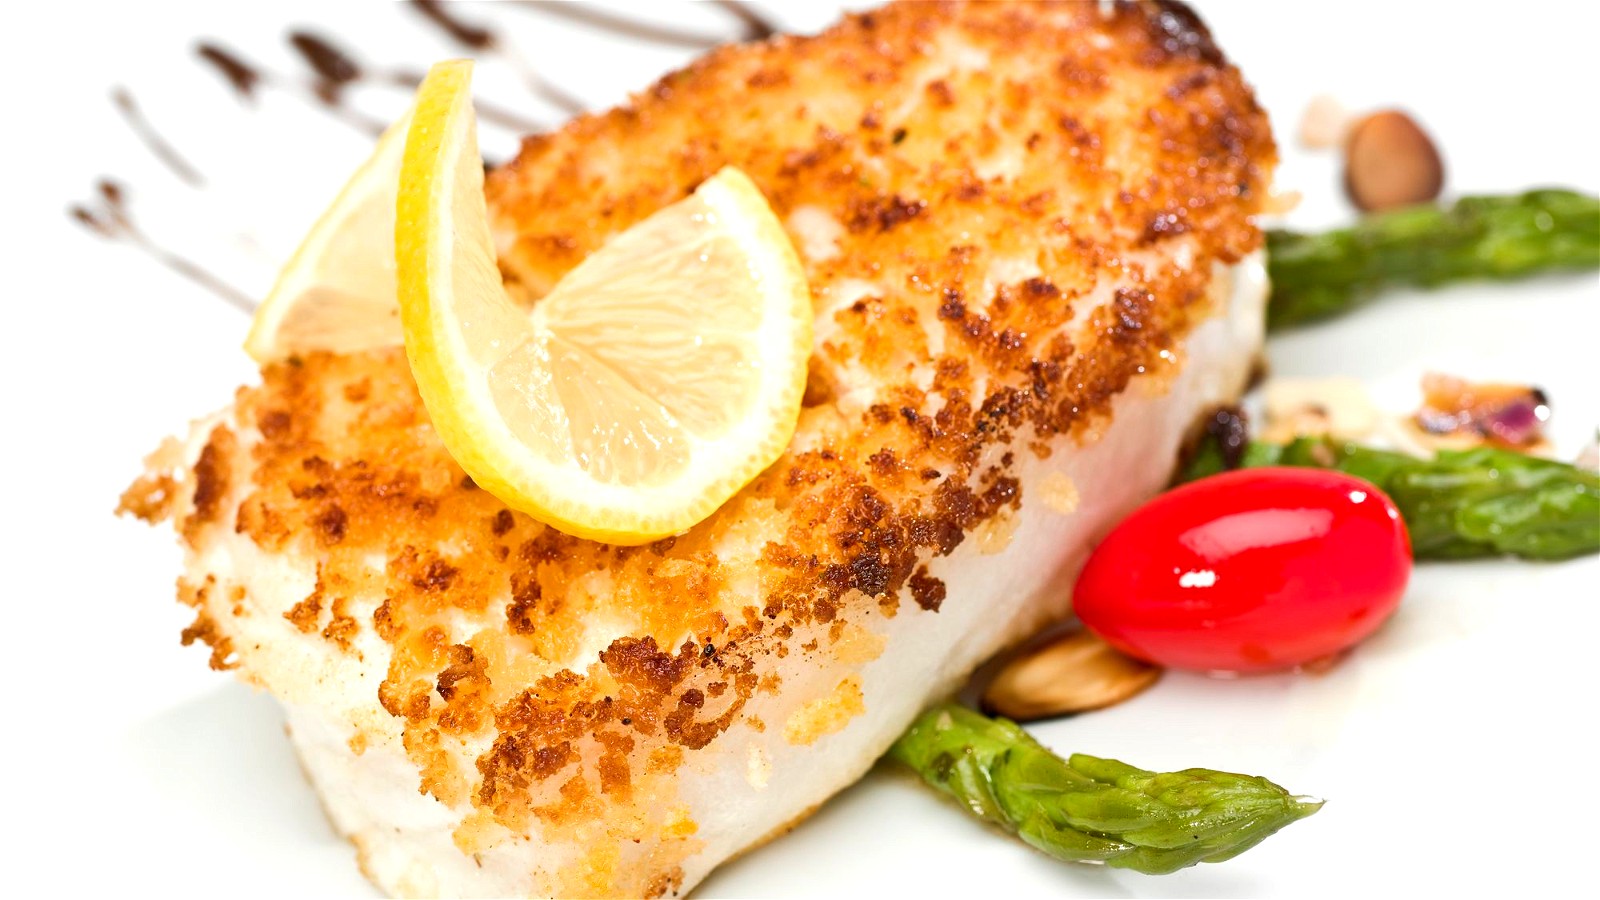 Image of Air-Fried Whole Halibut